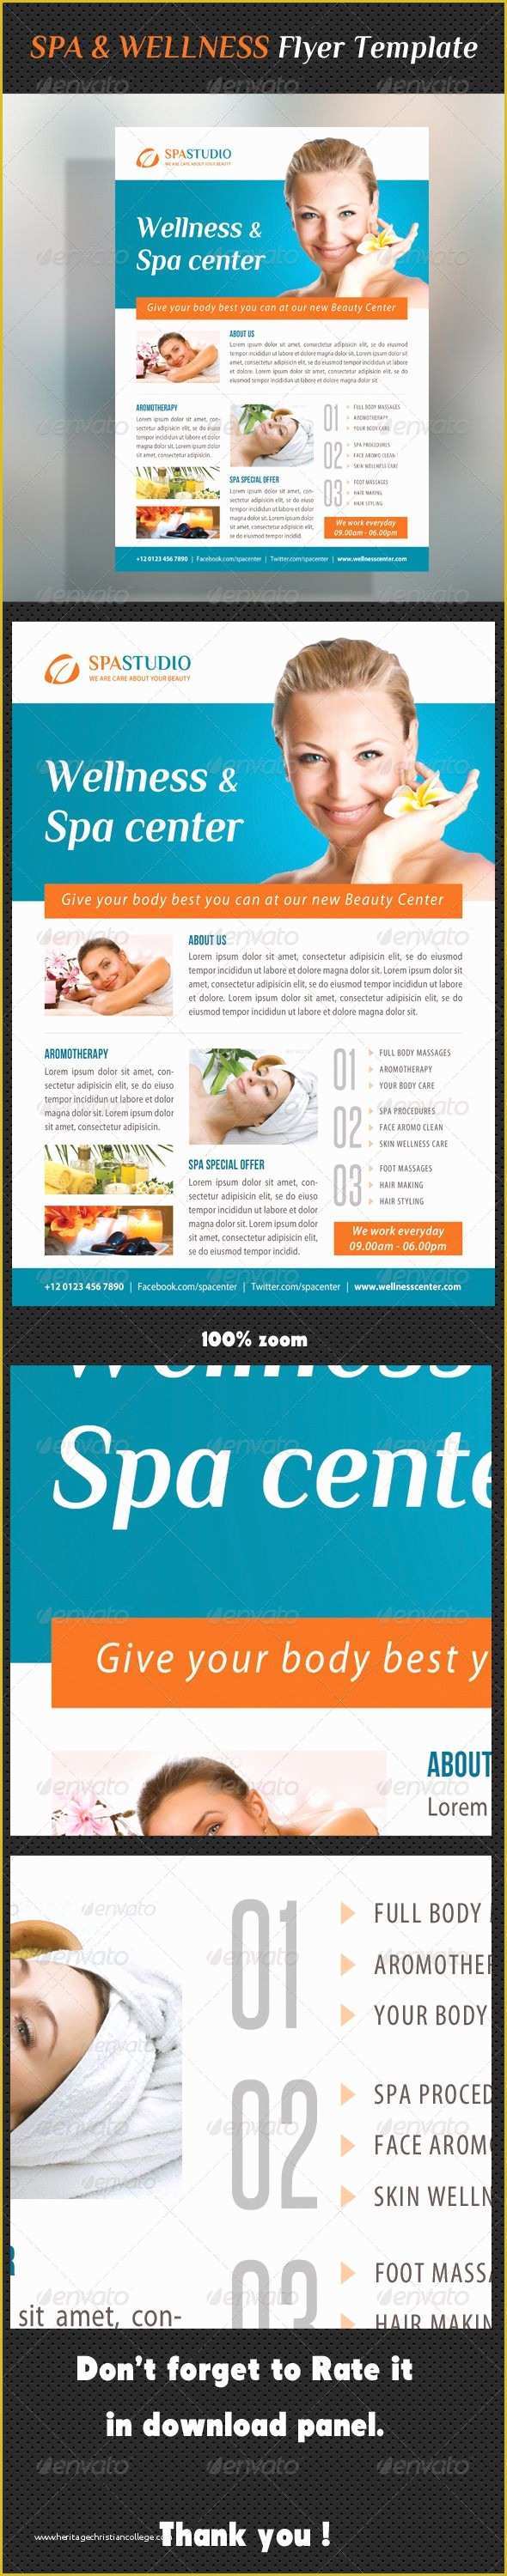 Wellness Flyer Templates Free Of 135 Best Images About Spa&wellness Need On Pinterest